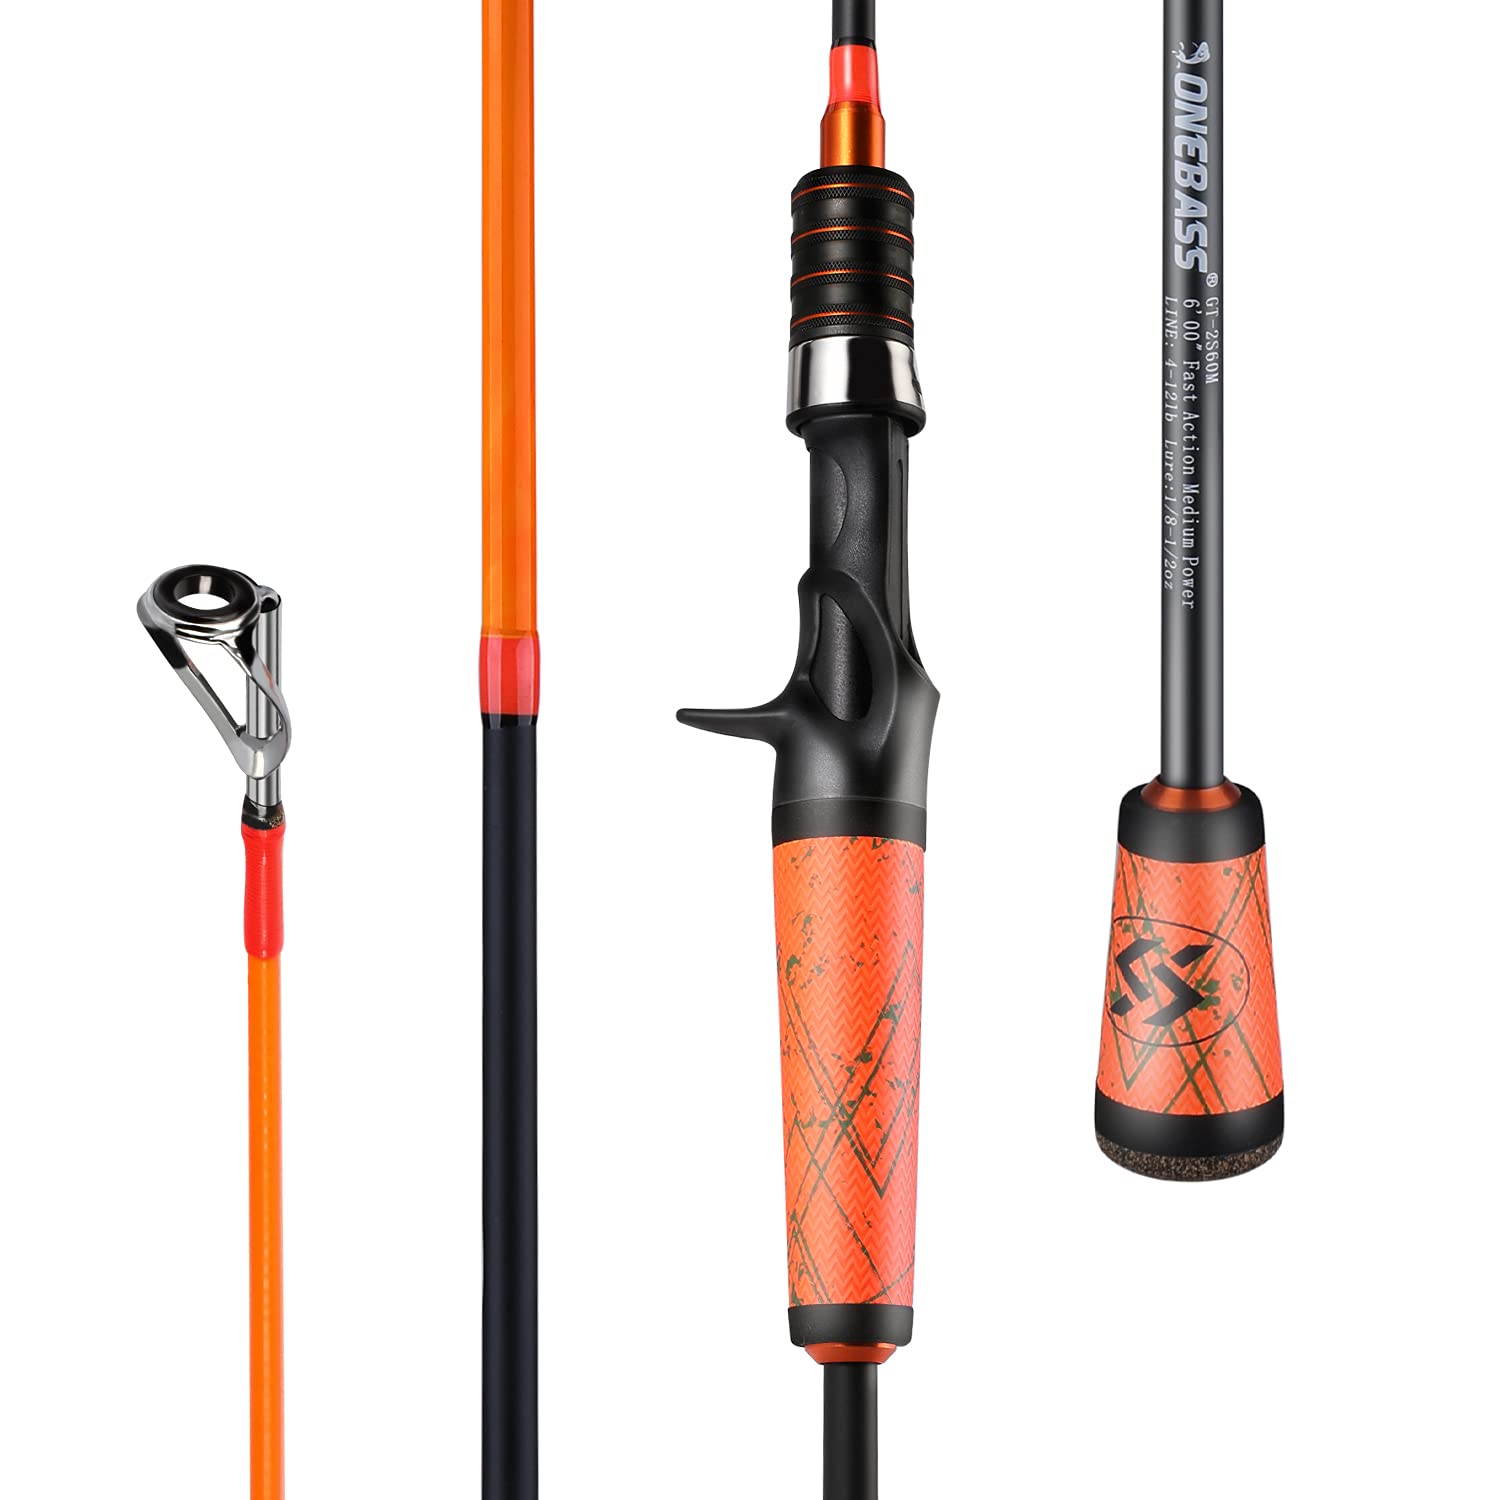 One Bass Fishing Pole 24 Ton Carbon Fiber Casting and Spinning Rods - Two  Pieces, SuperPolymer Handle Fishing Rod for Bass Fishing B-Orange-Cast Cast -6'6Medium-2piece